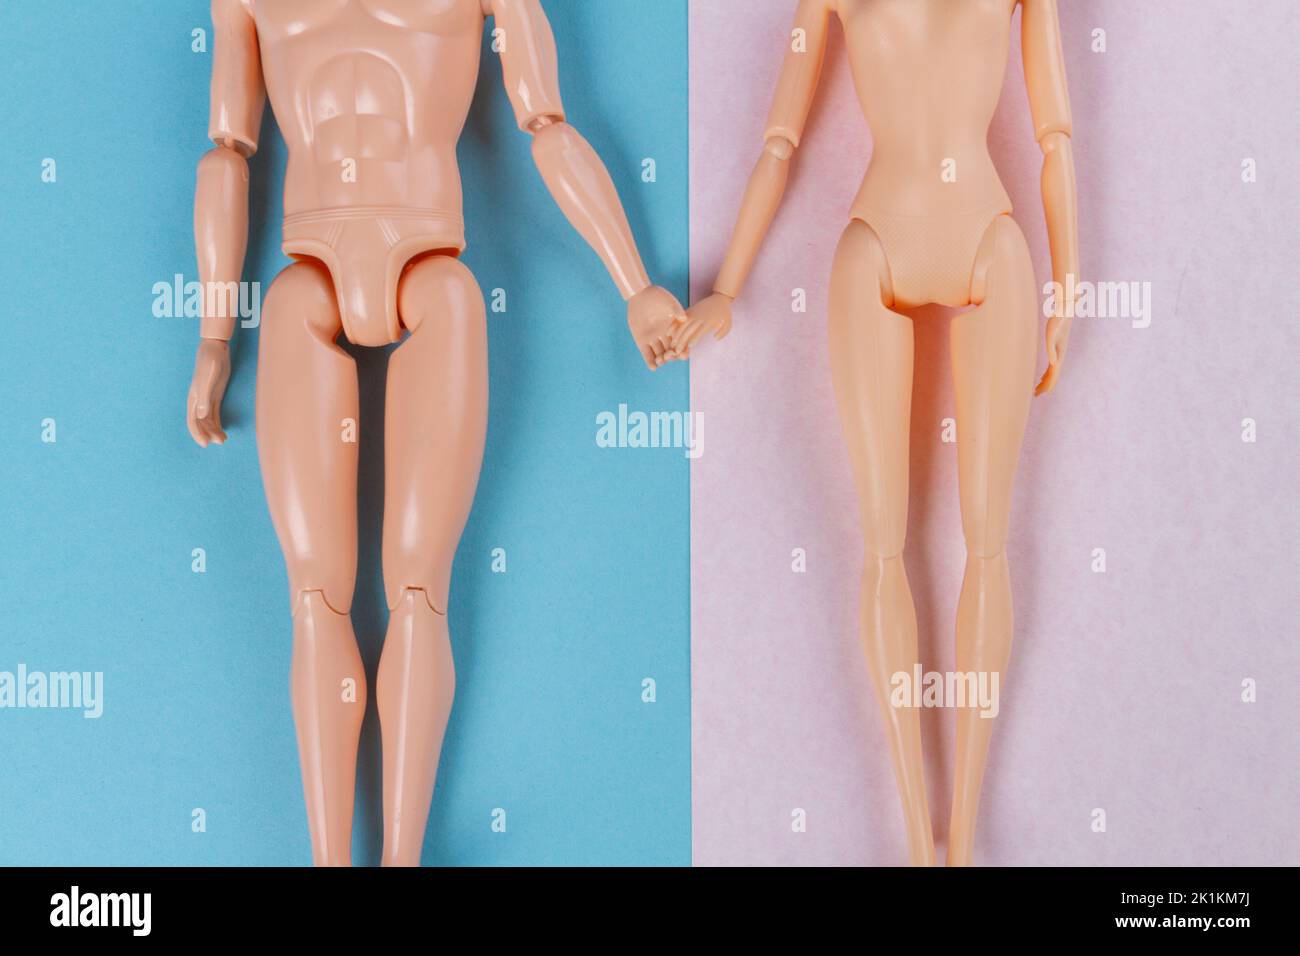 Top view naked doll couple holding hands. Blue and pink background. Stock Photo